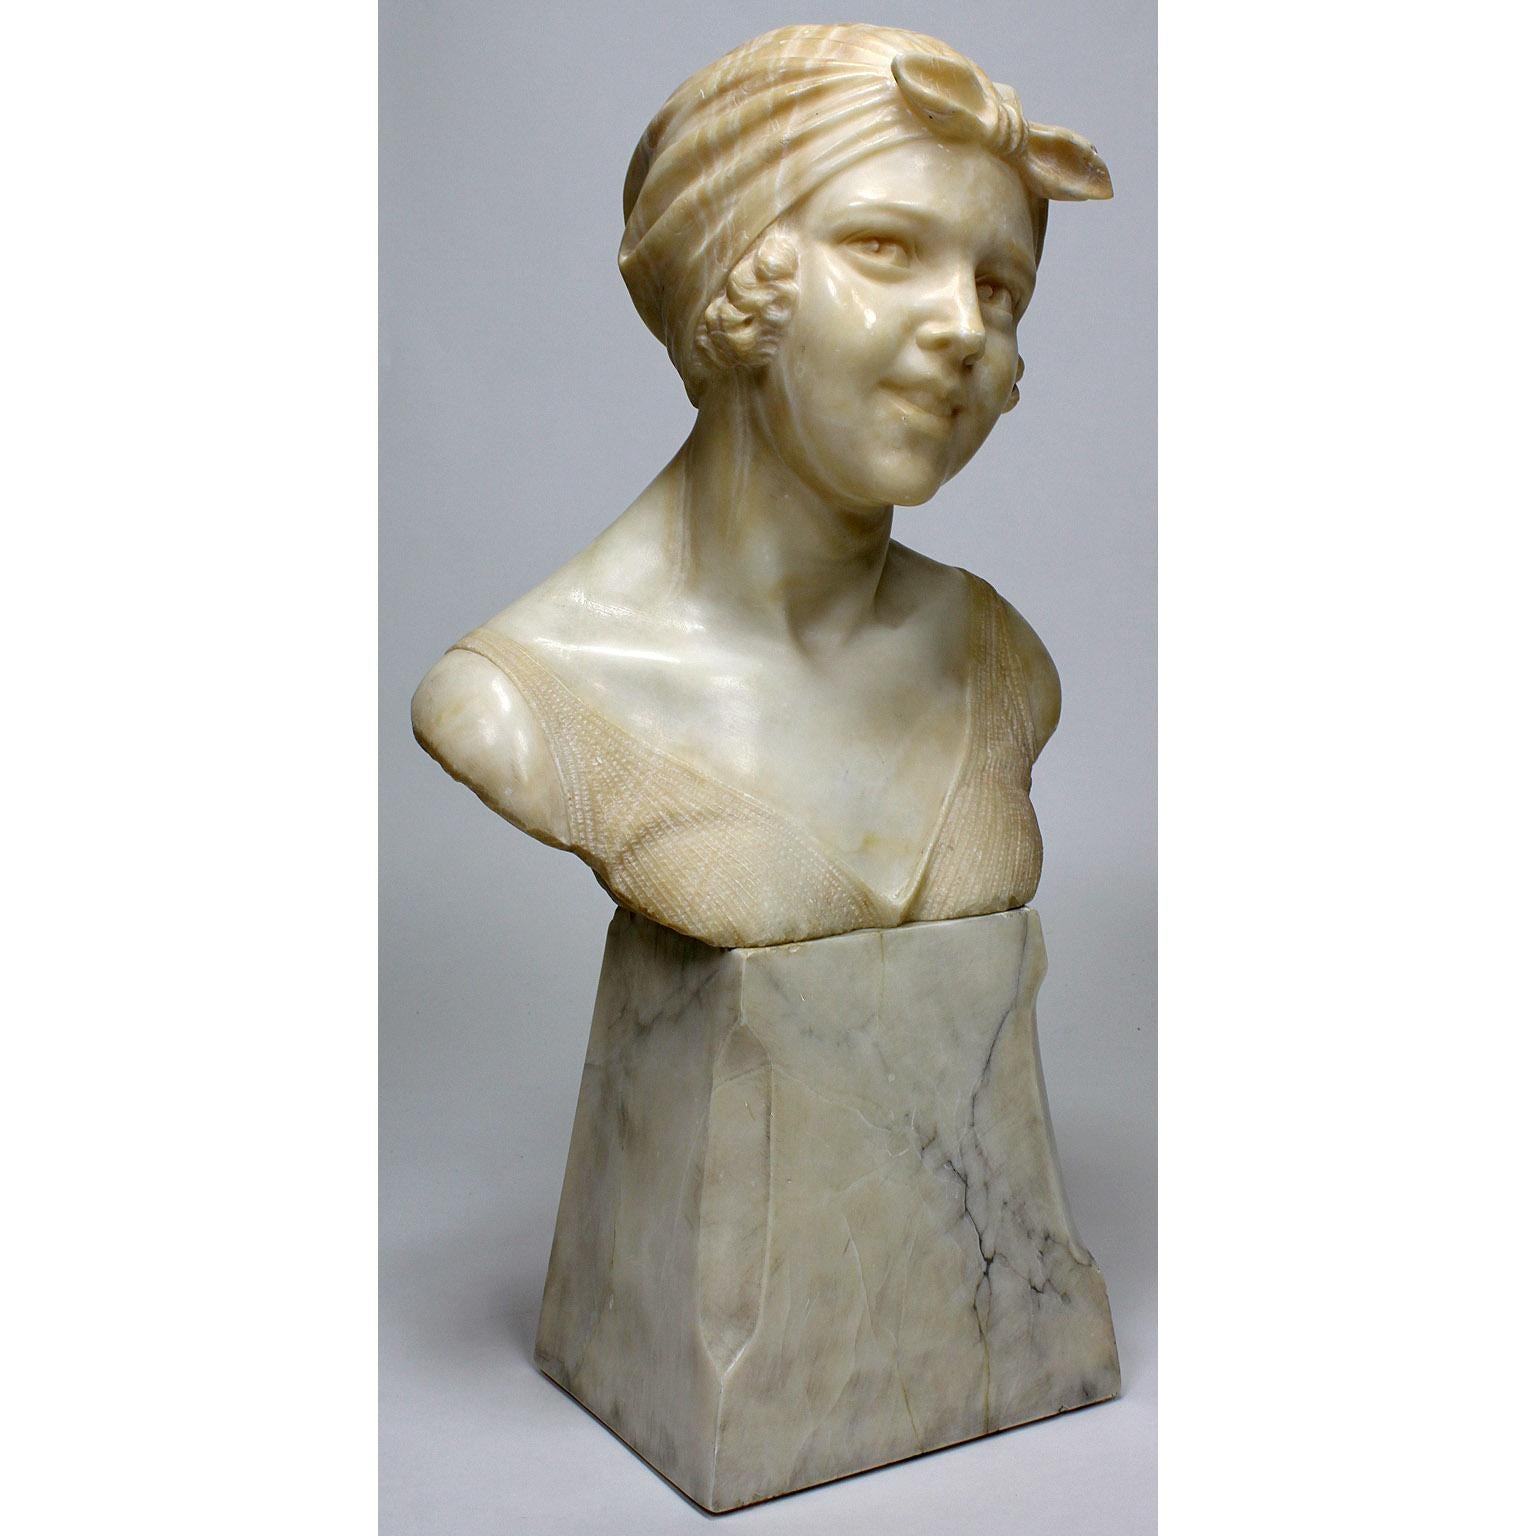 A charming Italian 19th-20th century carved alabaster bust of a young girl. The young beauty posing with a direct gaze, her hair tied with a head bandana tied on her forehead wearing a tank top, raised on a tapered alabaster stand. Signed and